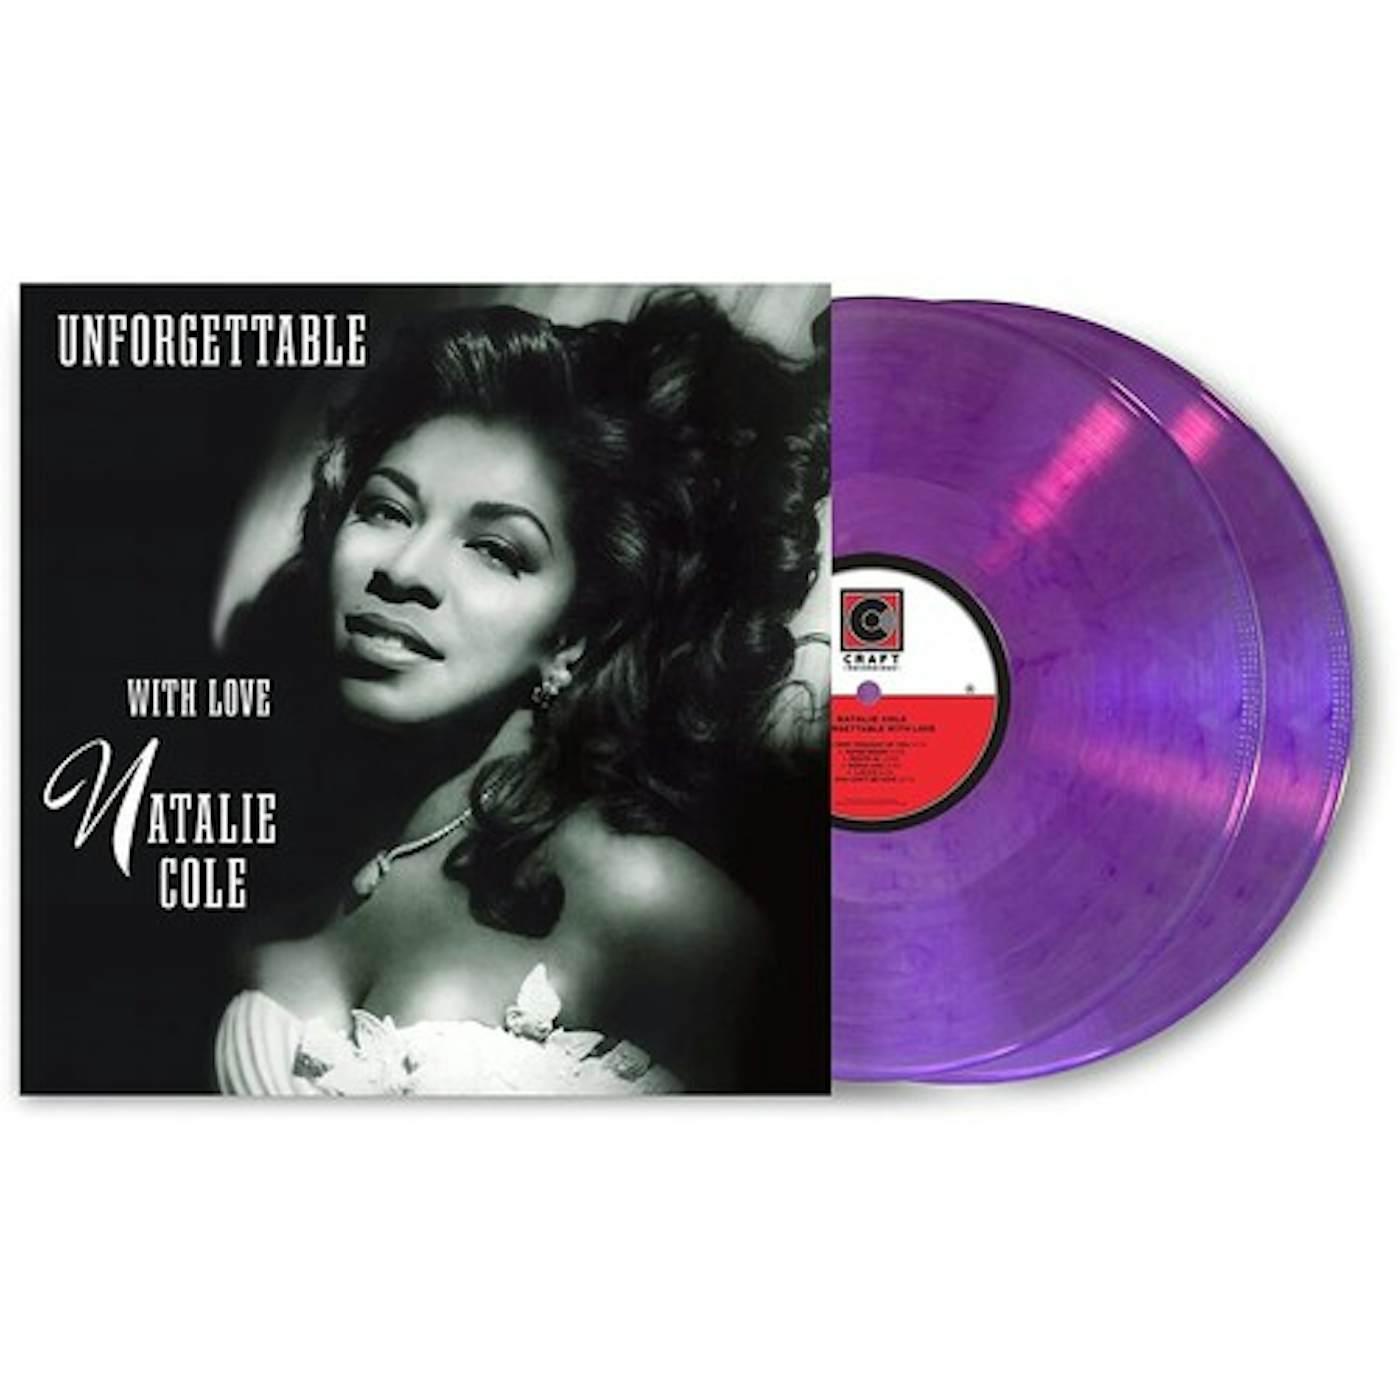 Natalie Cole Unforgettable With Love (30th Anniversary/Clear Purple/2 LP) Vinyl Record